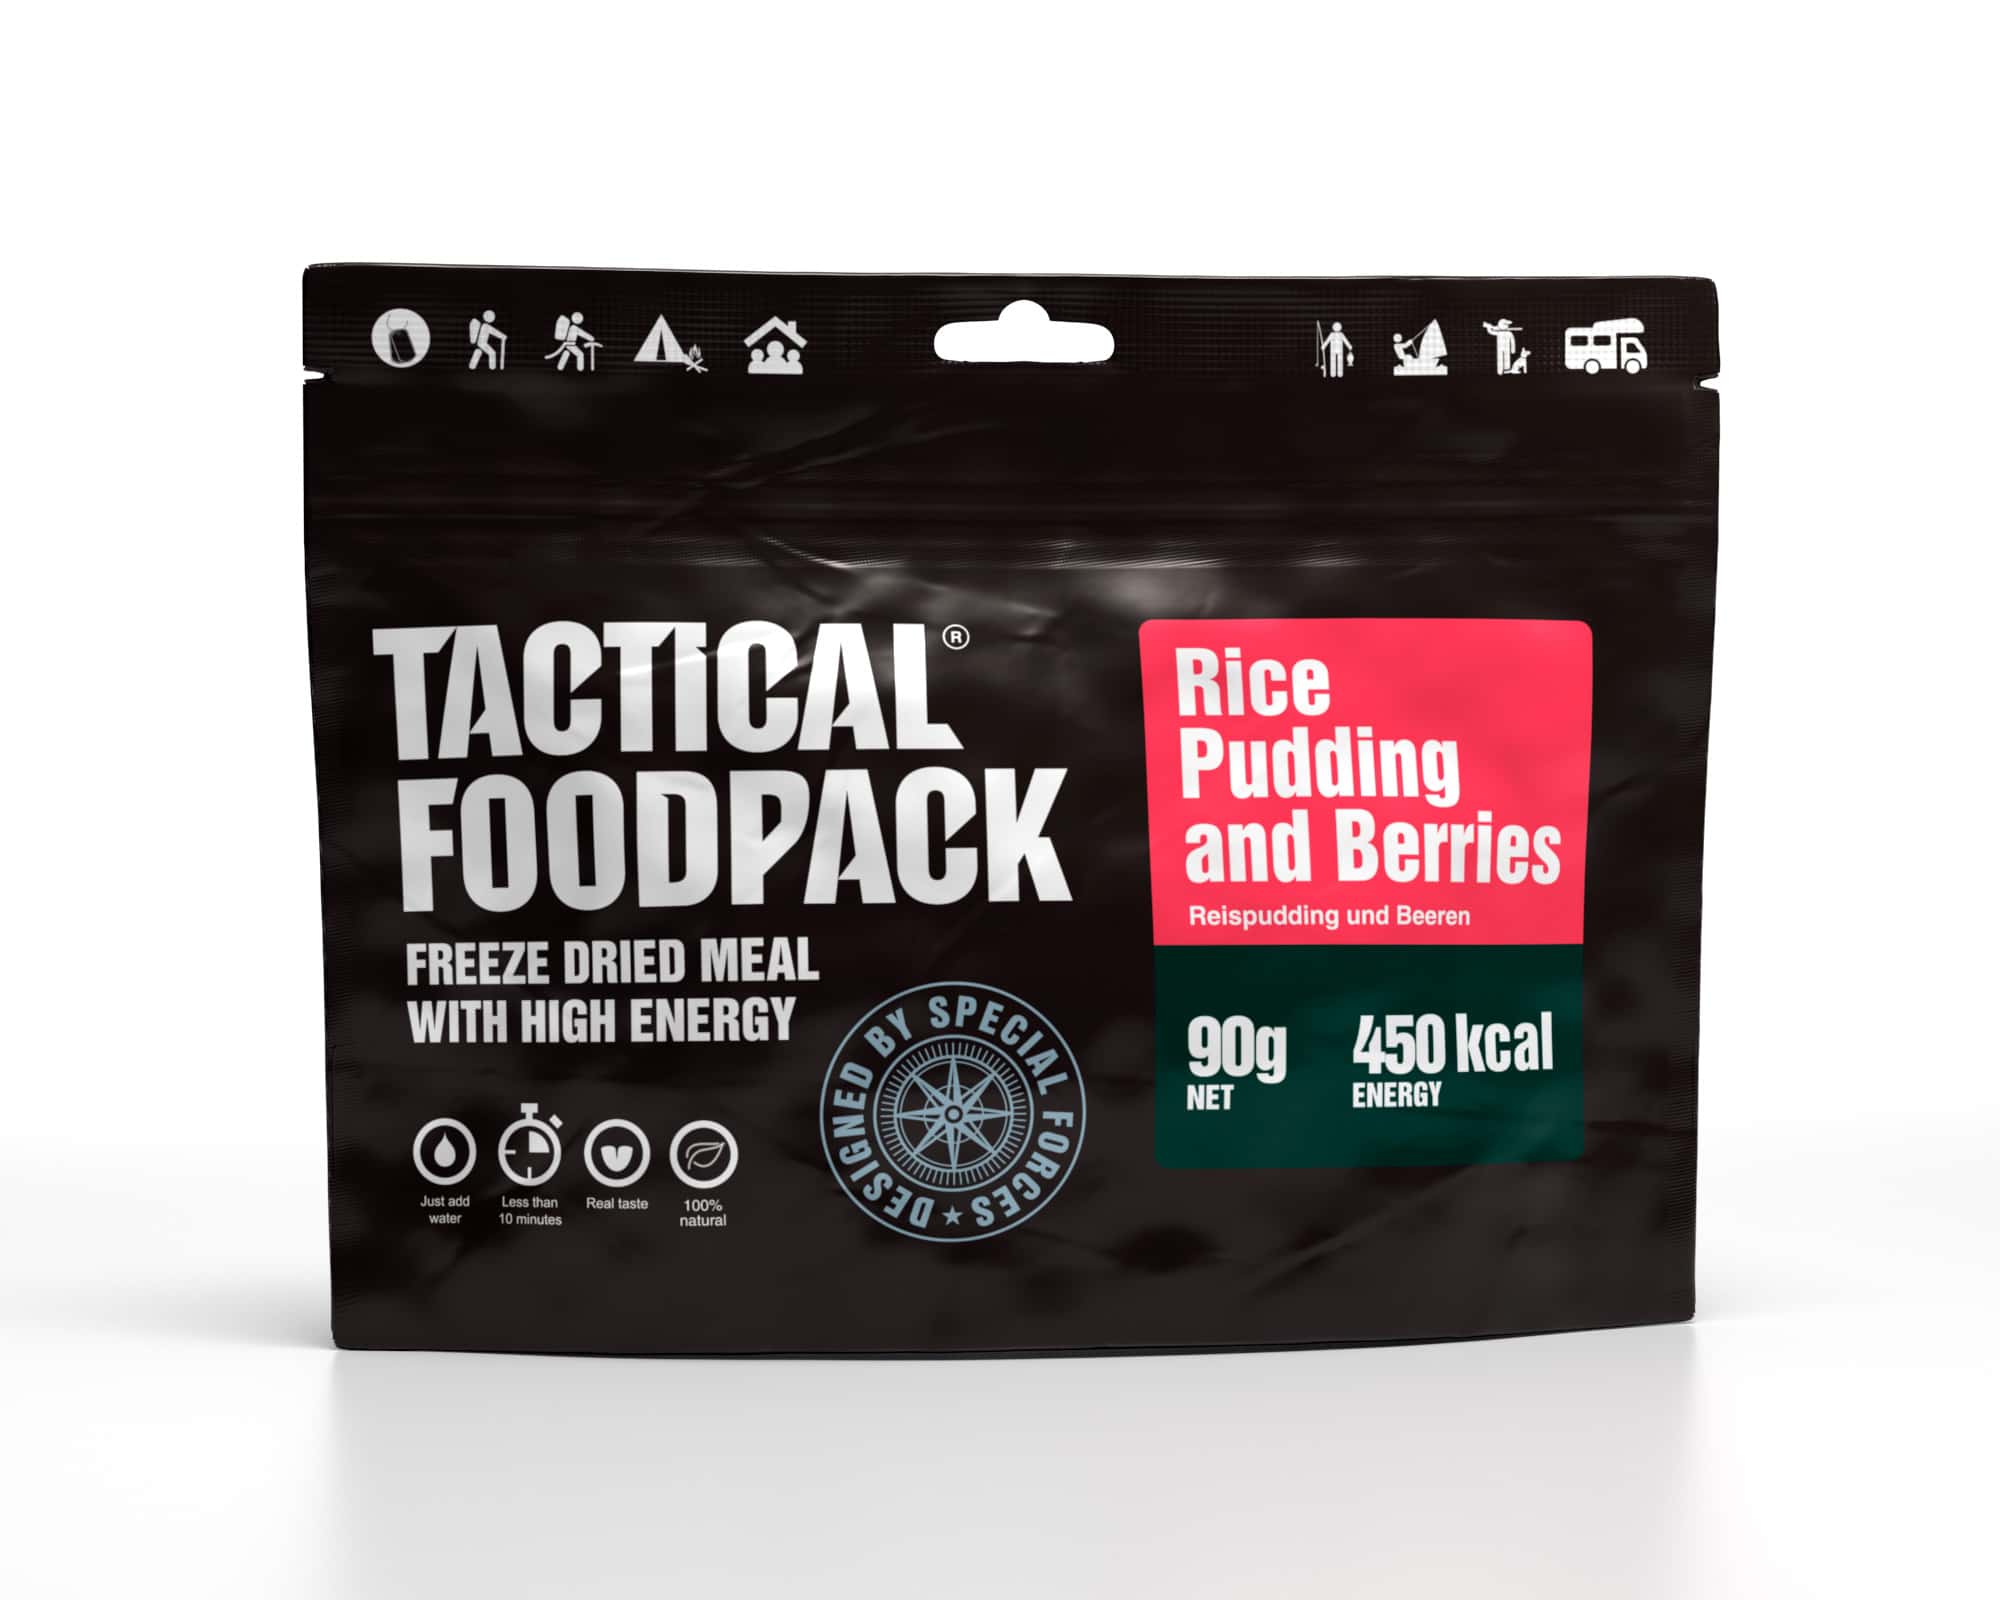 Tactical Foodpack Rice Pudding et Berries